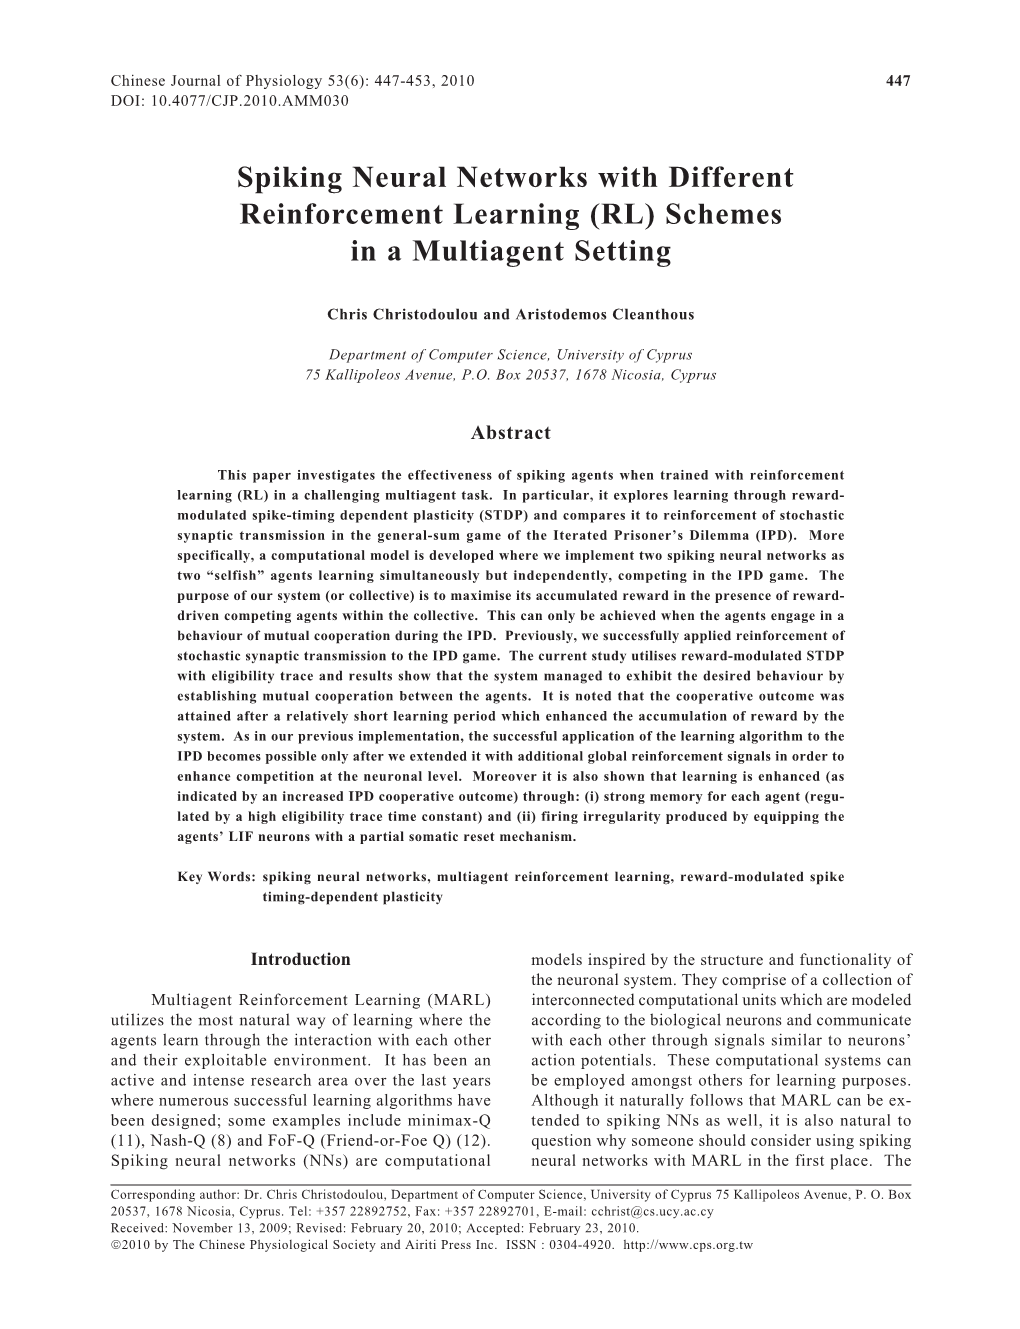 Spiking Neural Networks with Different Reinforcement Learning (RL) Schemes in a Multiagent Setting